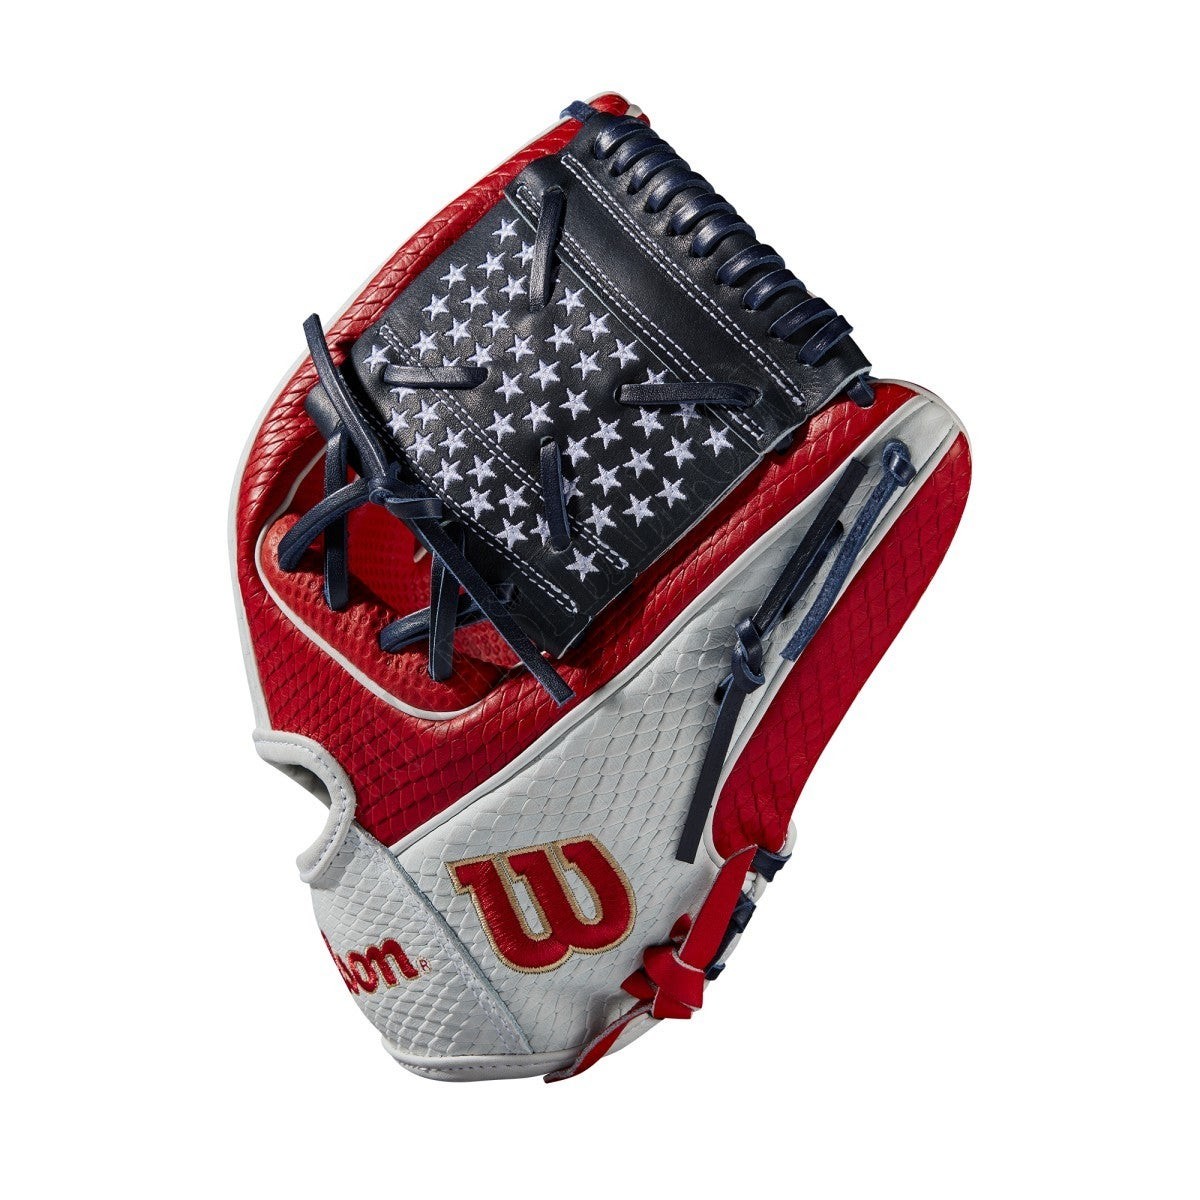 2021 A2000 KS7 GM 12" Infield Fastpitch Glove ● Wilson Promotions - -3